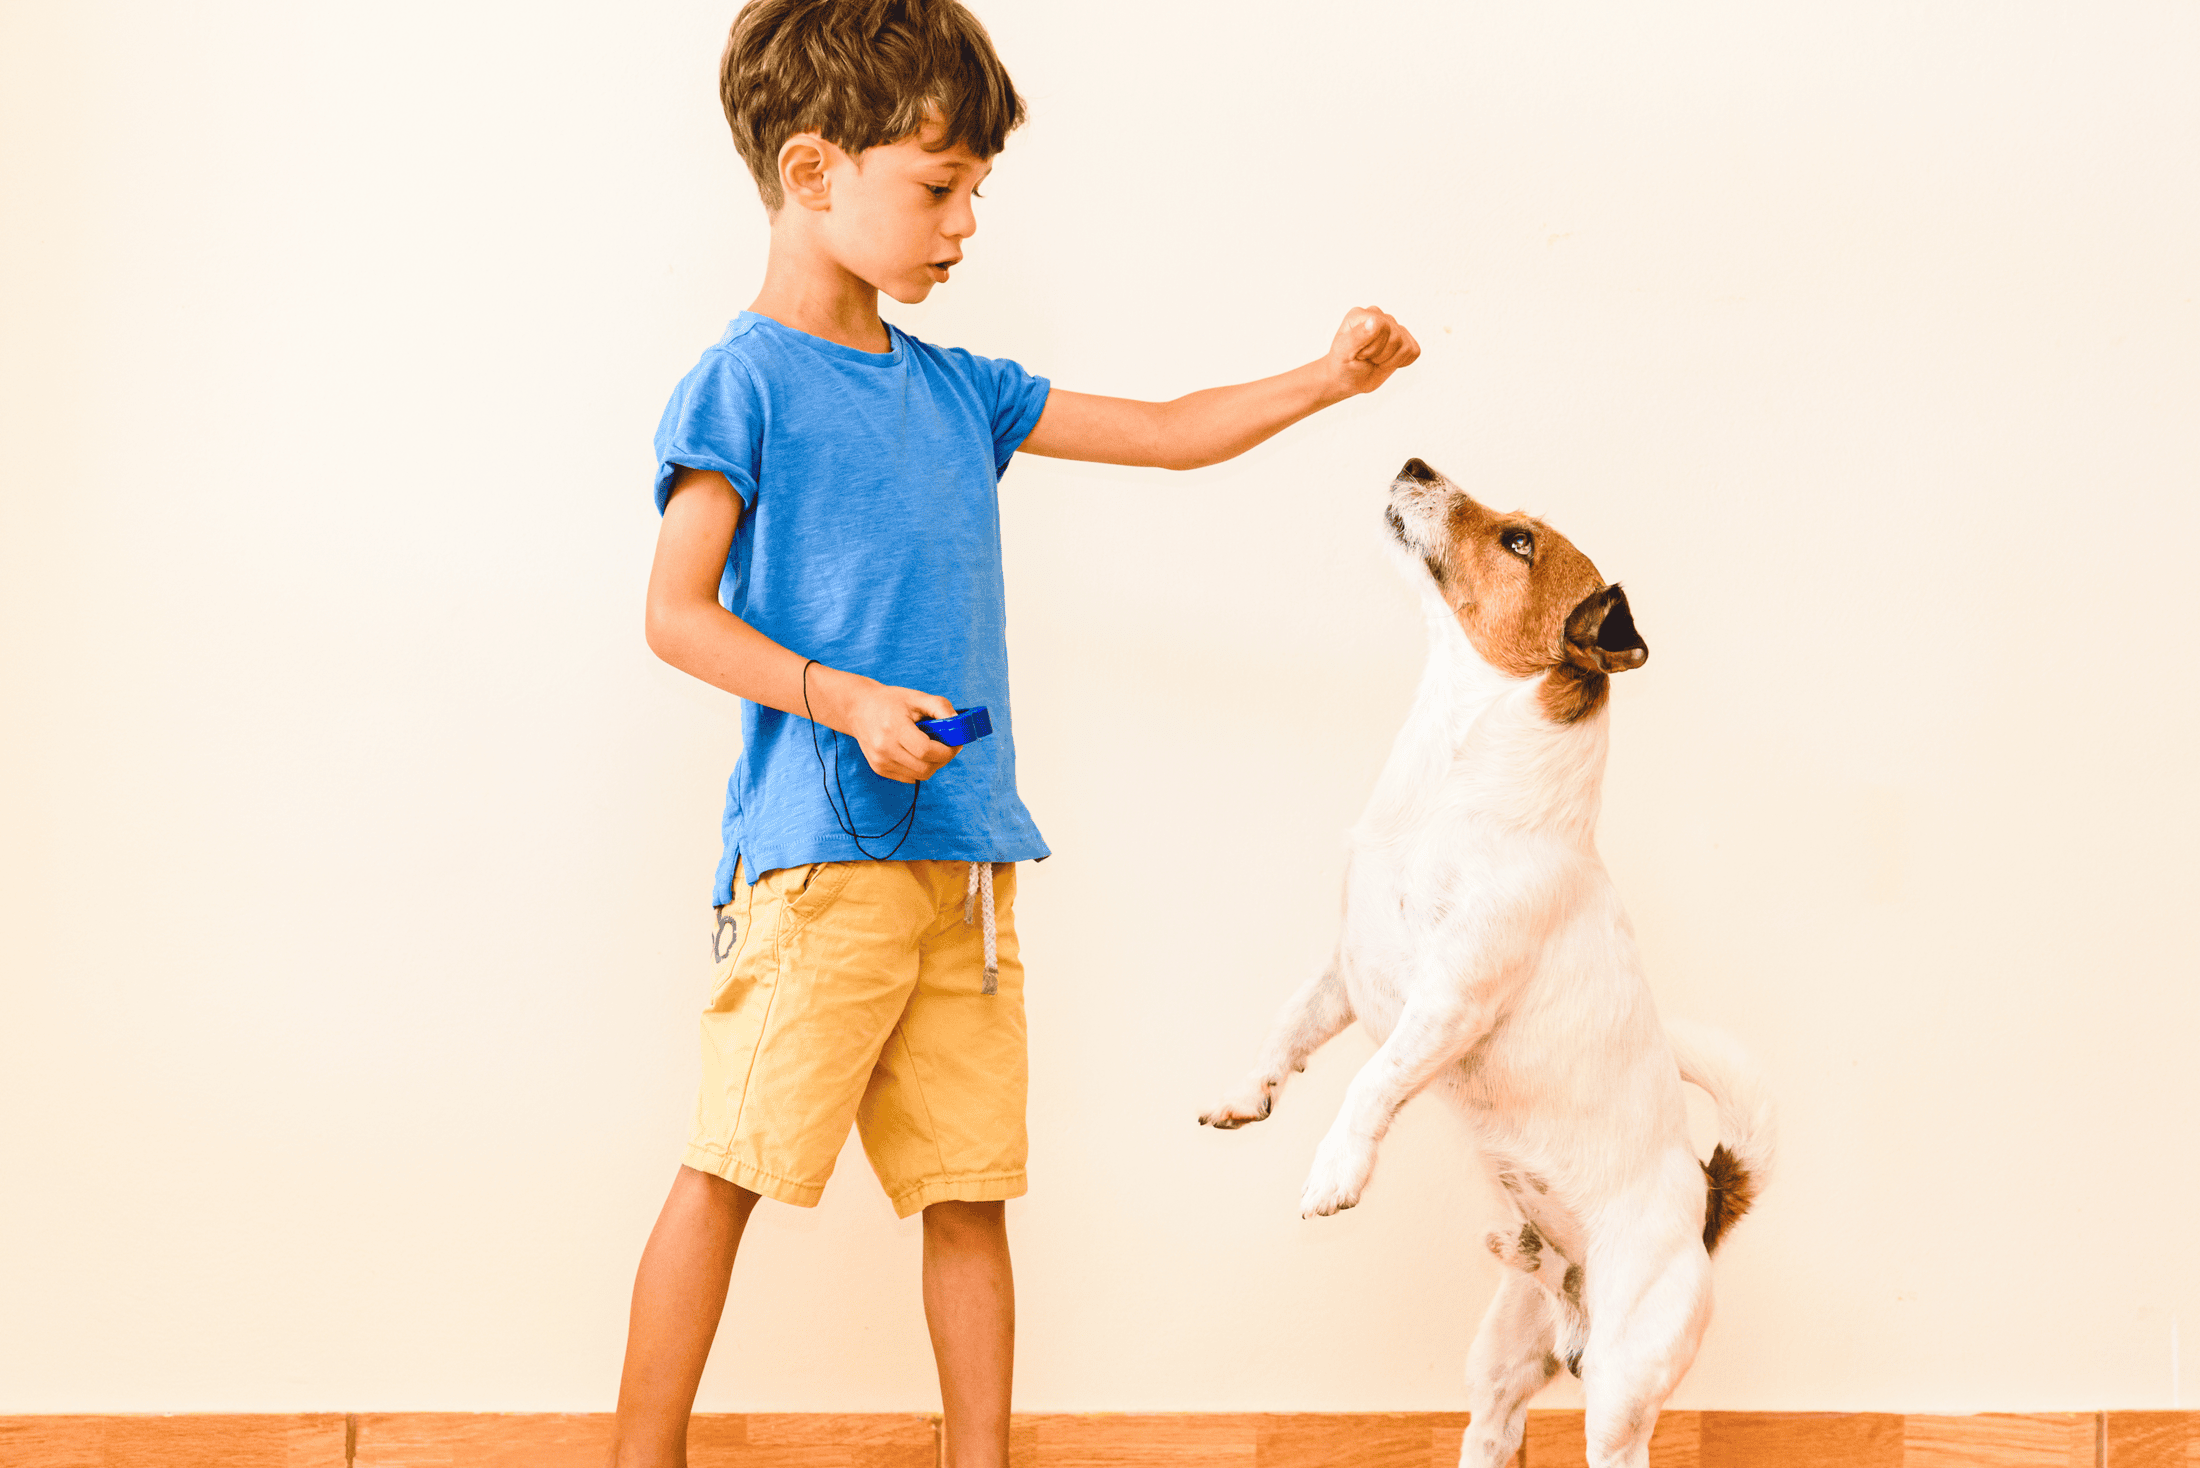 Dog clicker training and operant conditioning comes naturally to children. You can show your kids how to train your dog basic commands with either a clicker or a marker word.